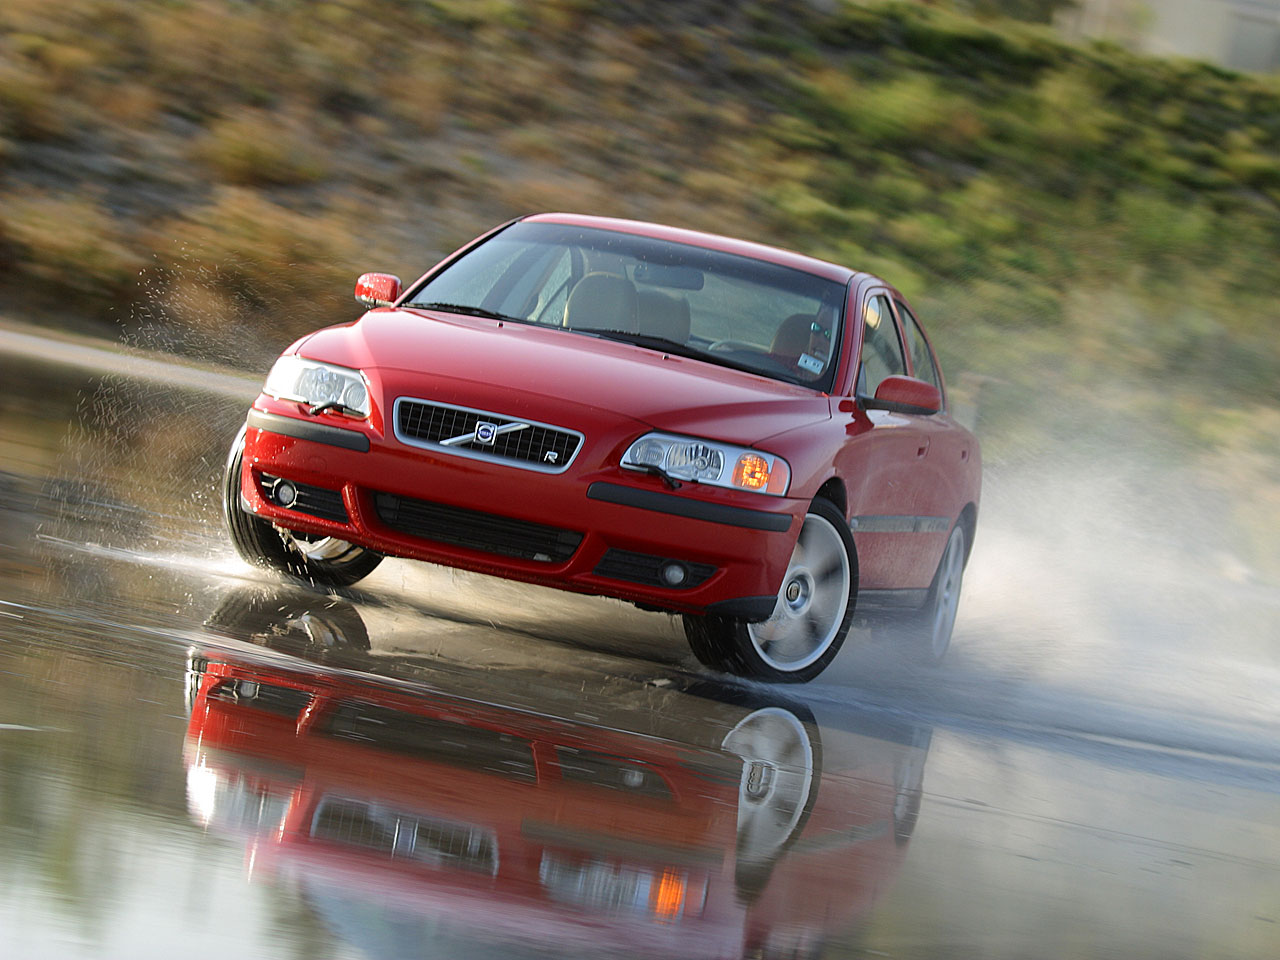 Volvo S60 R Car Pictures And Wallpaper